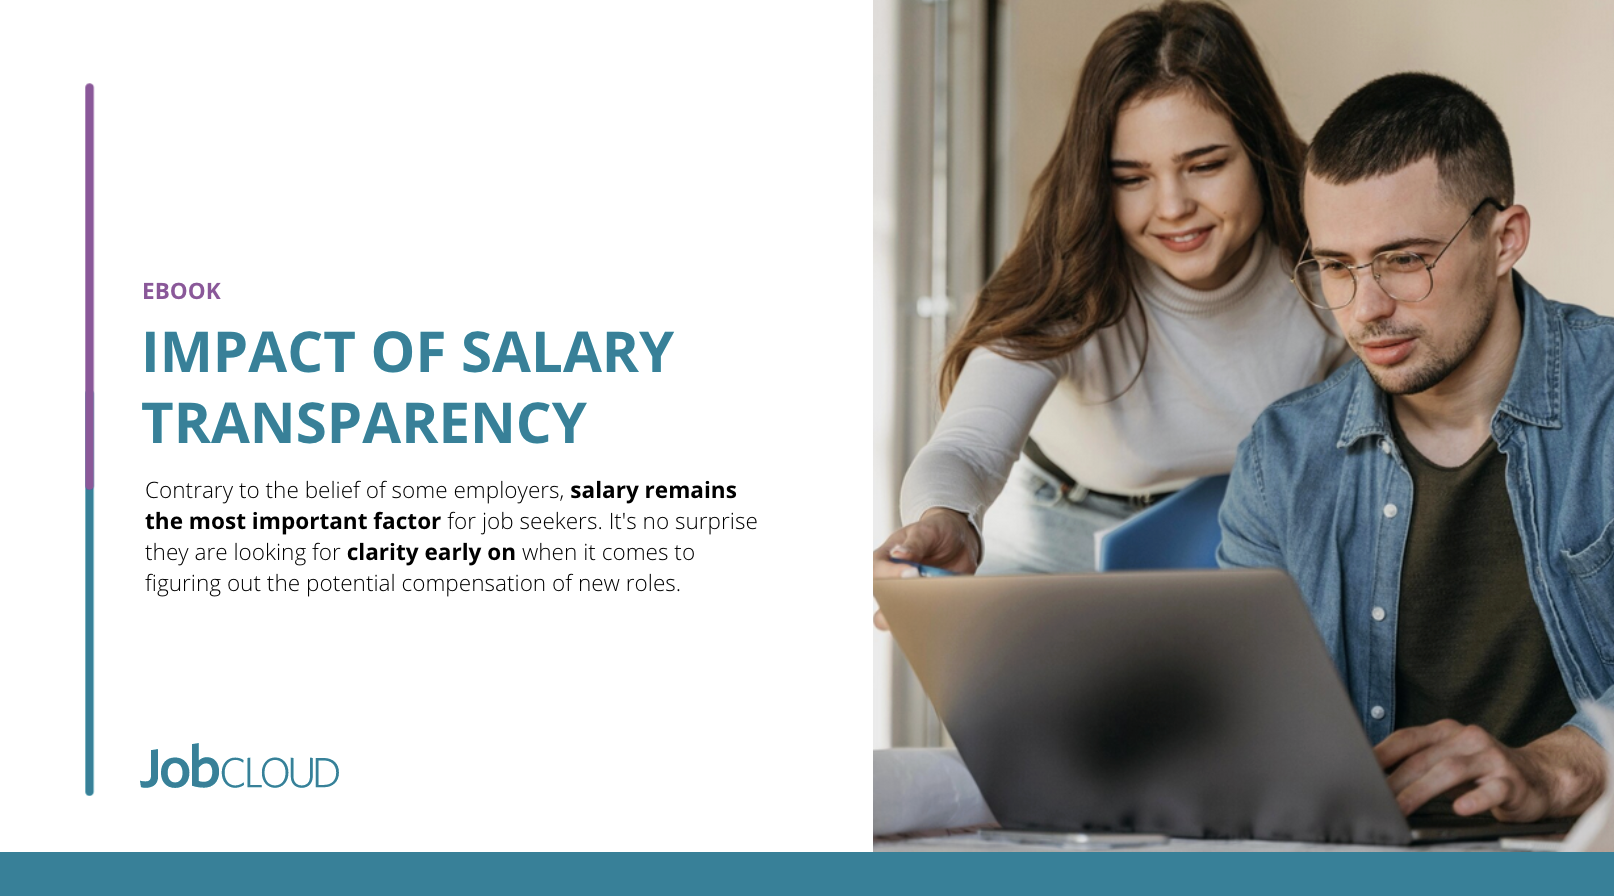 Impact on salary transparency